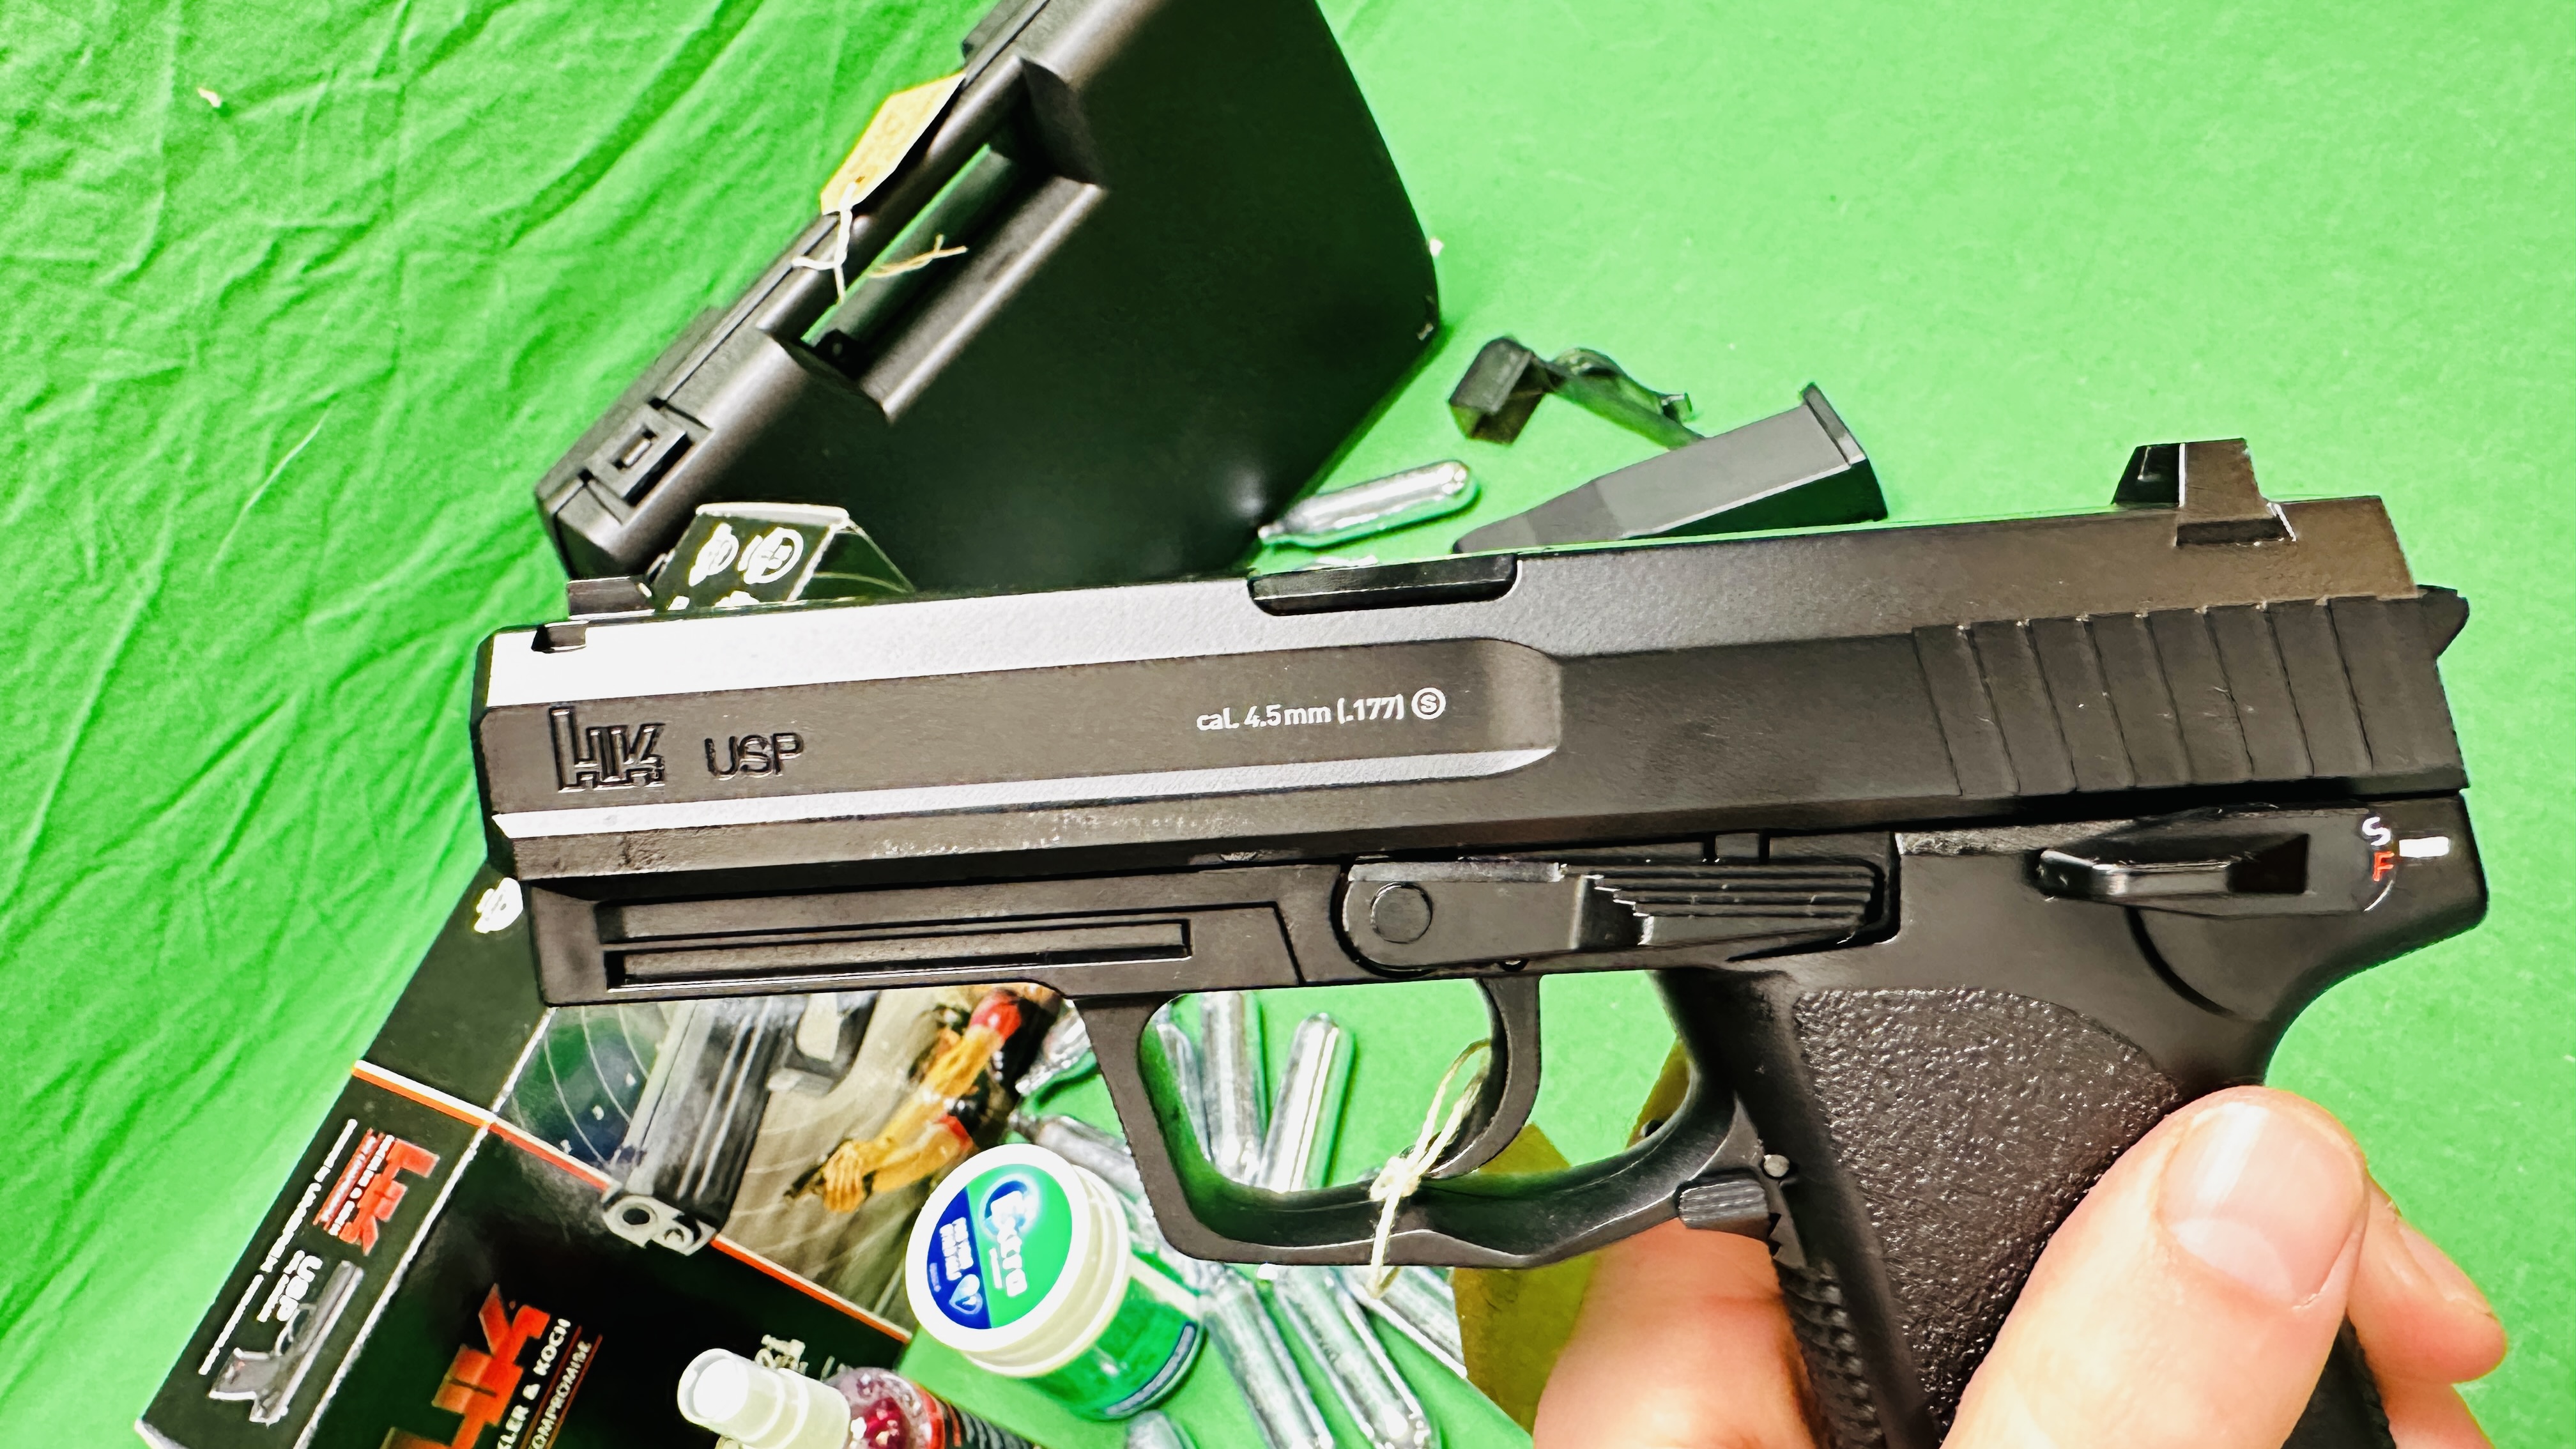 A BOXED HECKLER & KOCH USP 22 ROUND CO2 STEEL BB AIR PISTOL COMPLETE WITH HARD TRANSIT CASE, - Image 10 of 15